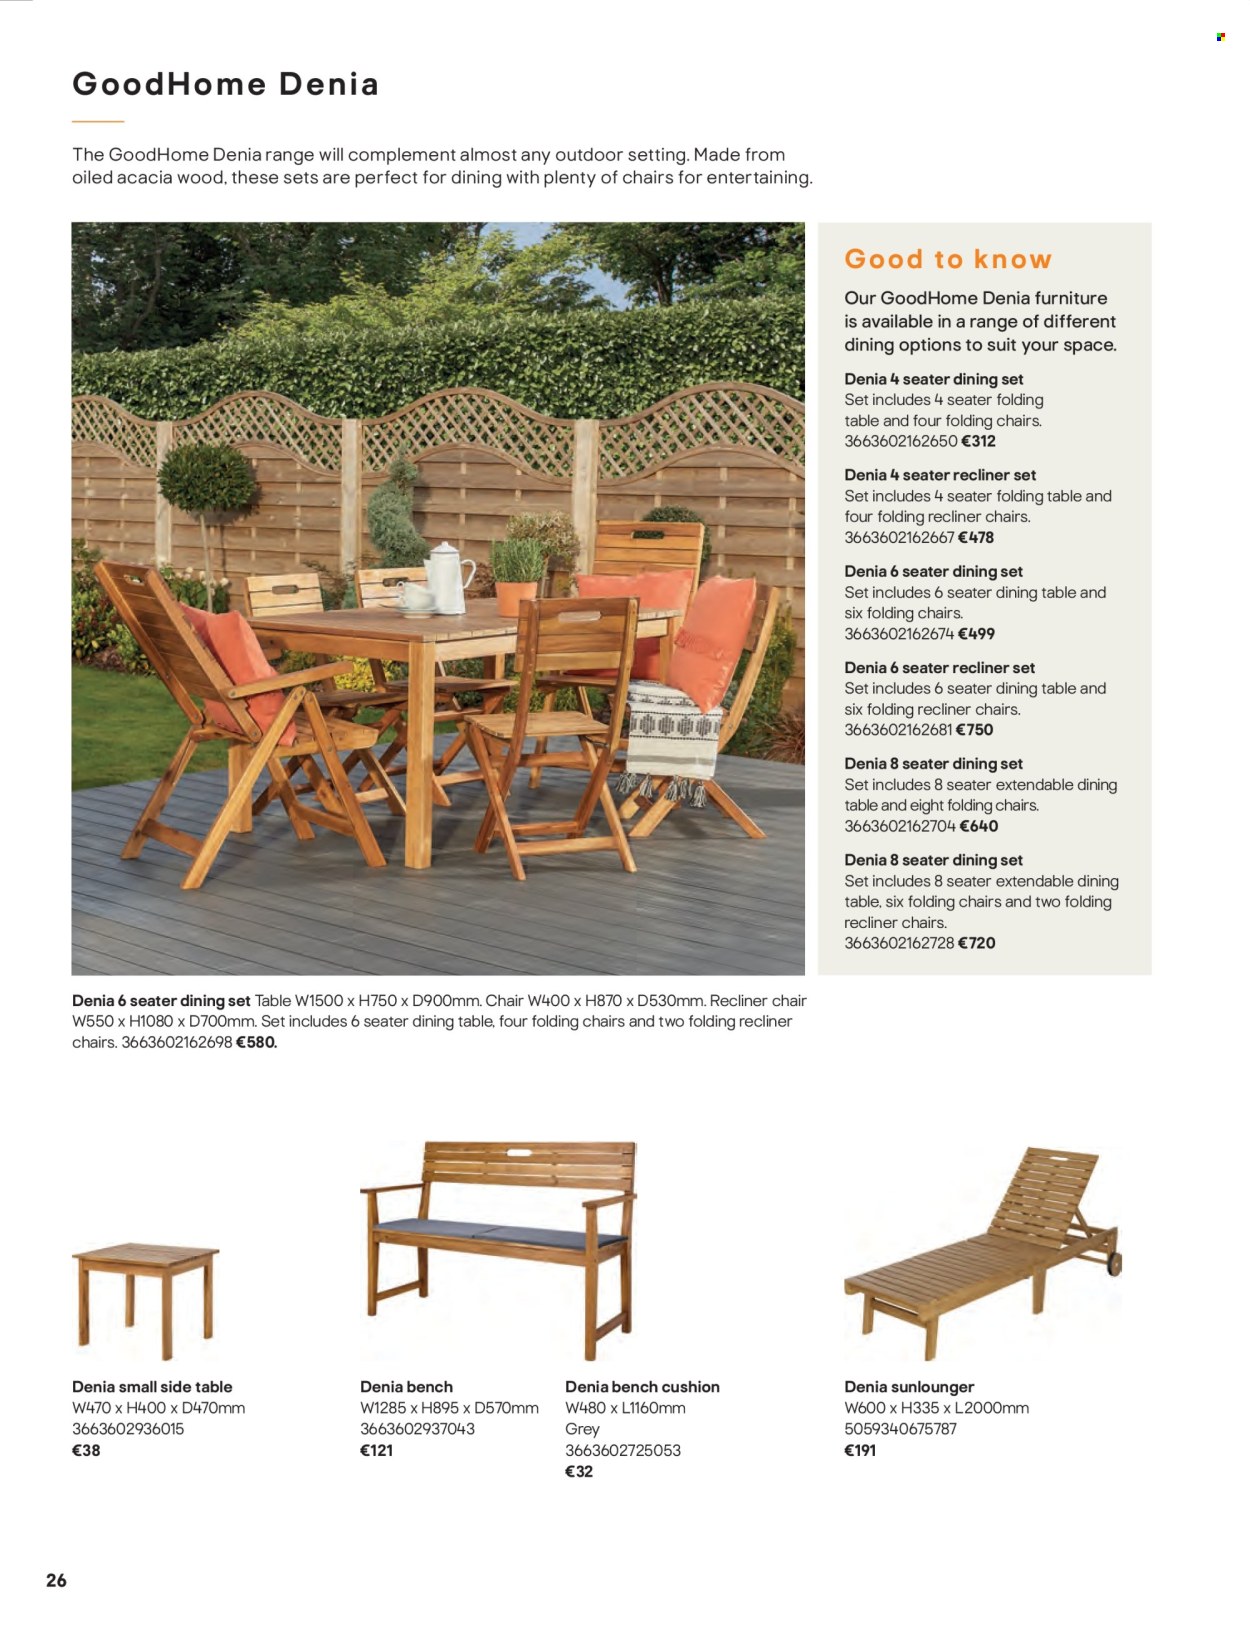 thumbnail - B&Q offer  - Sales products - dining set, dining table, table, chair, recliner chair, sidetable, folding table, lounger, cushion, bench cushion. Page 26.